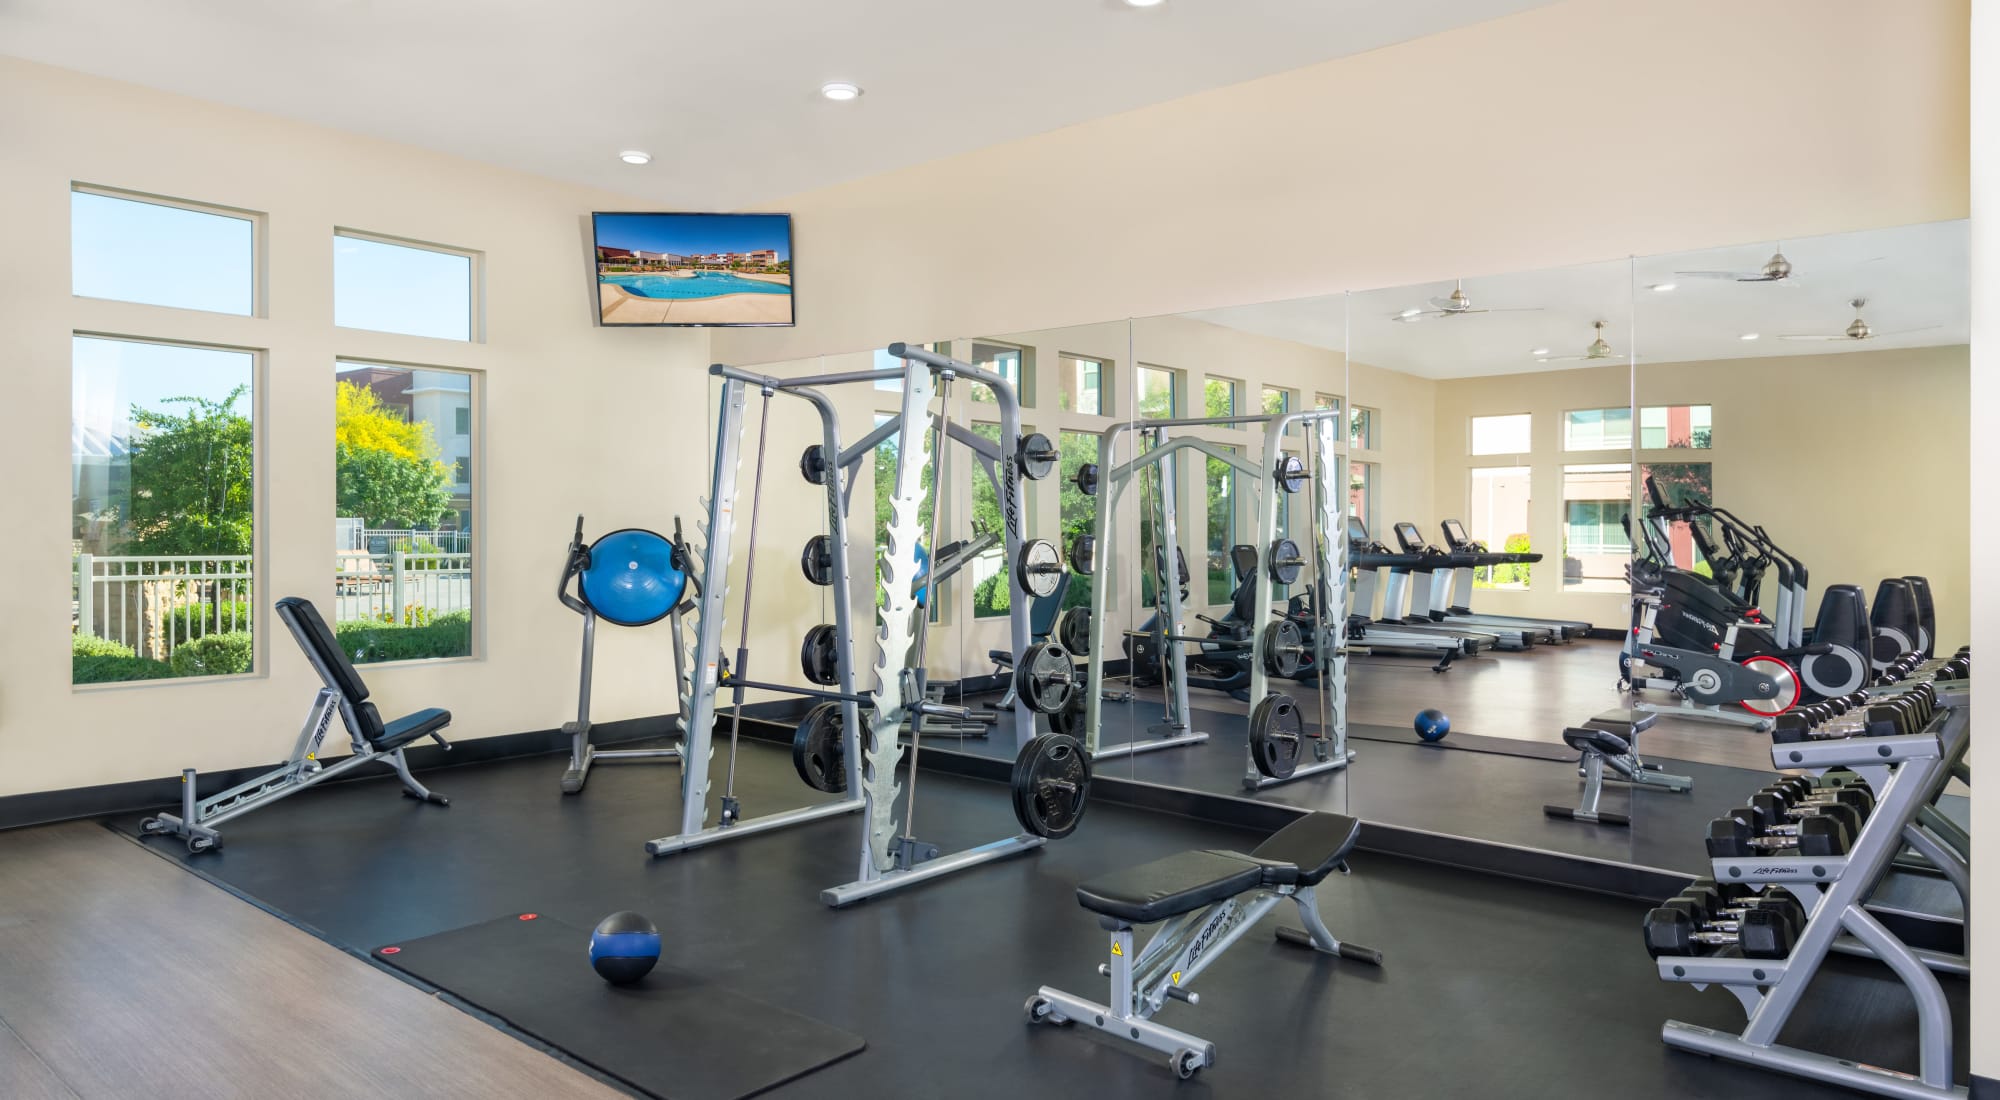 Fitness center at Southern Avenue Villas